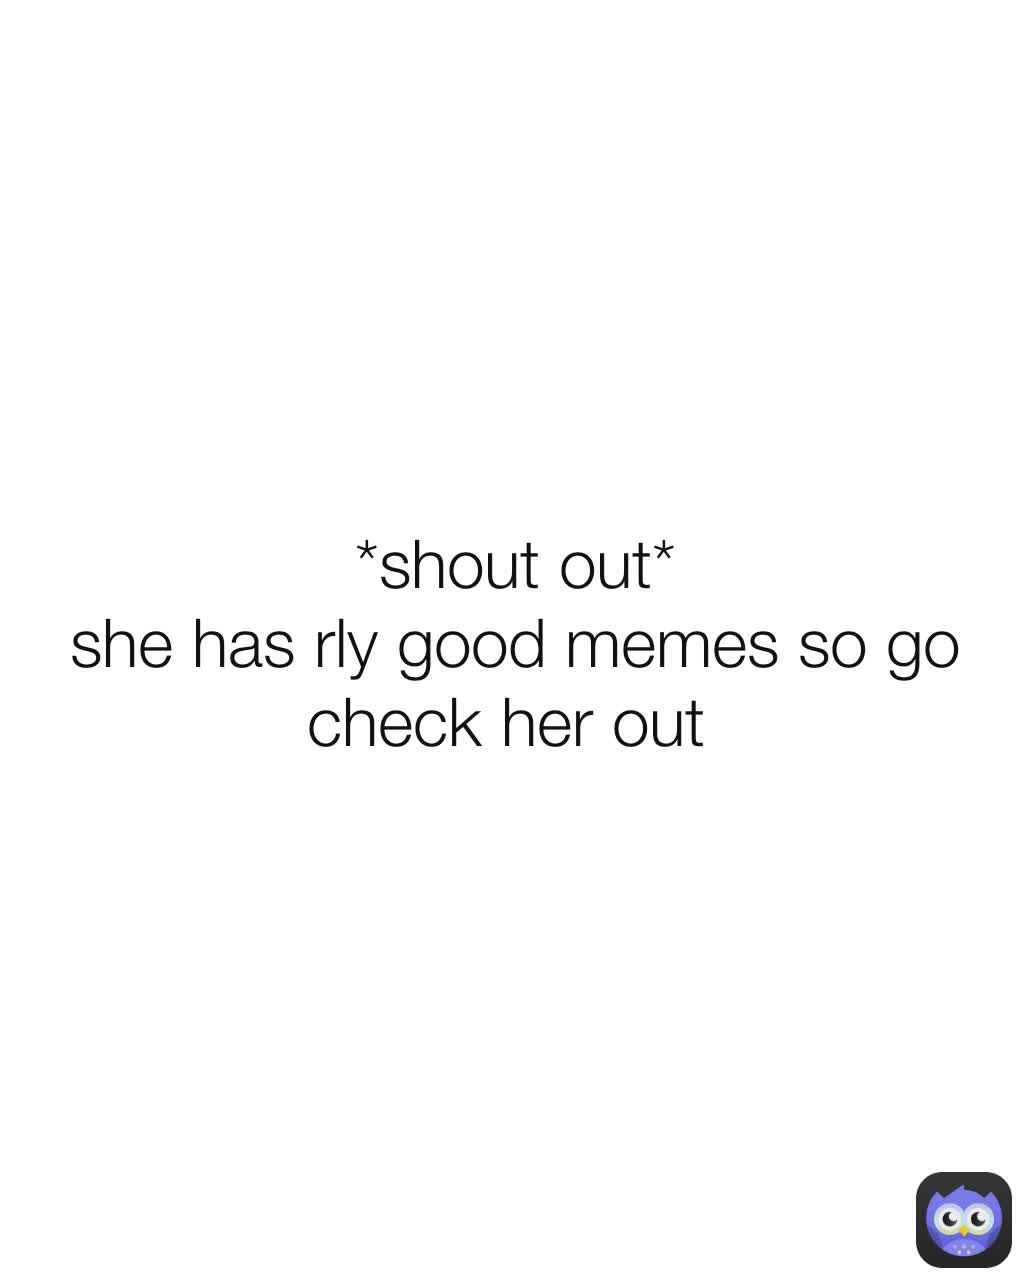 *shout out*
she has rly good memes so go check her out 